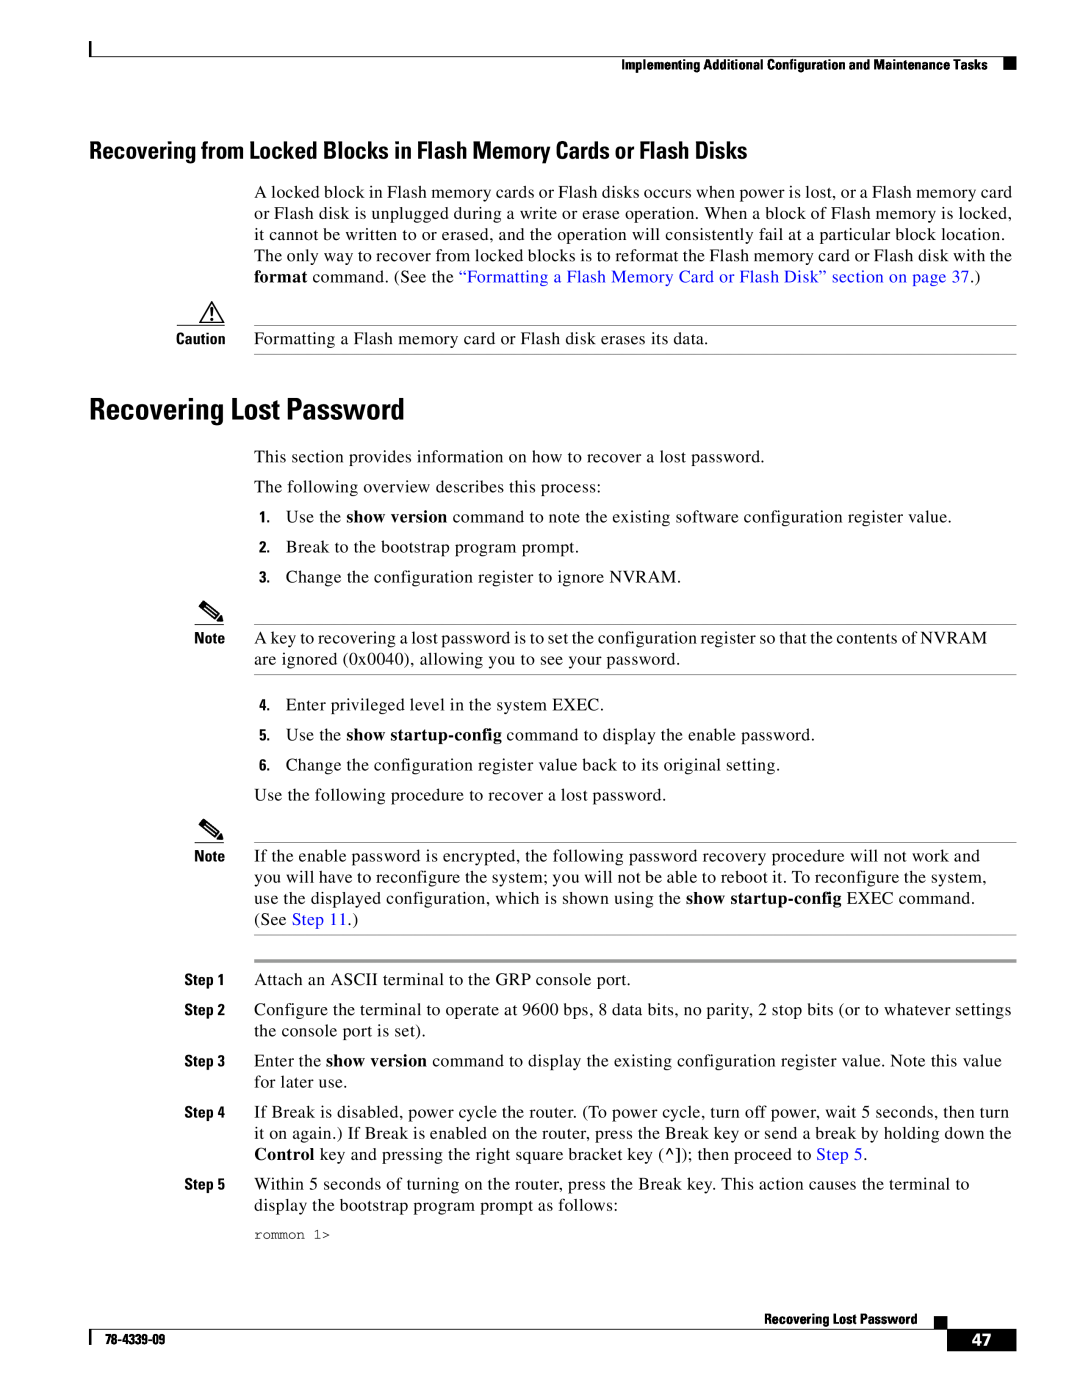 Cisco Systems GRP-B manual Recovering Lost Password, Recovering from Locked Blocks in Flash Memory Cards or Flash Disks 